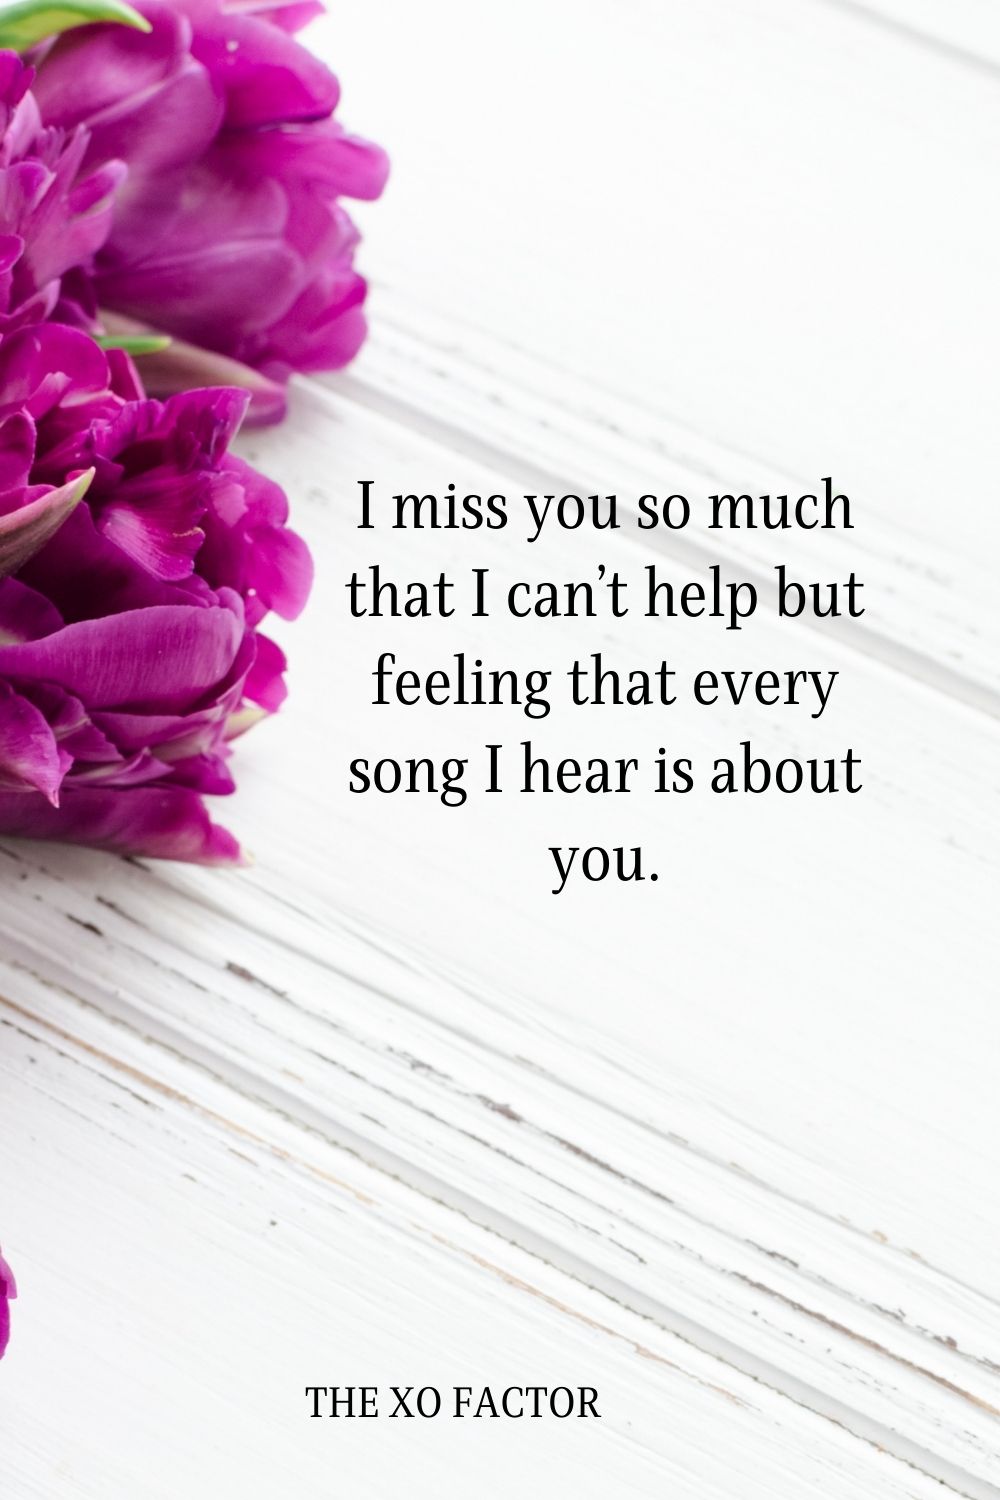 I miss you so much that I can’t help but feeling that every song I hear is about you.